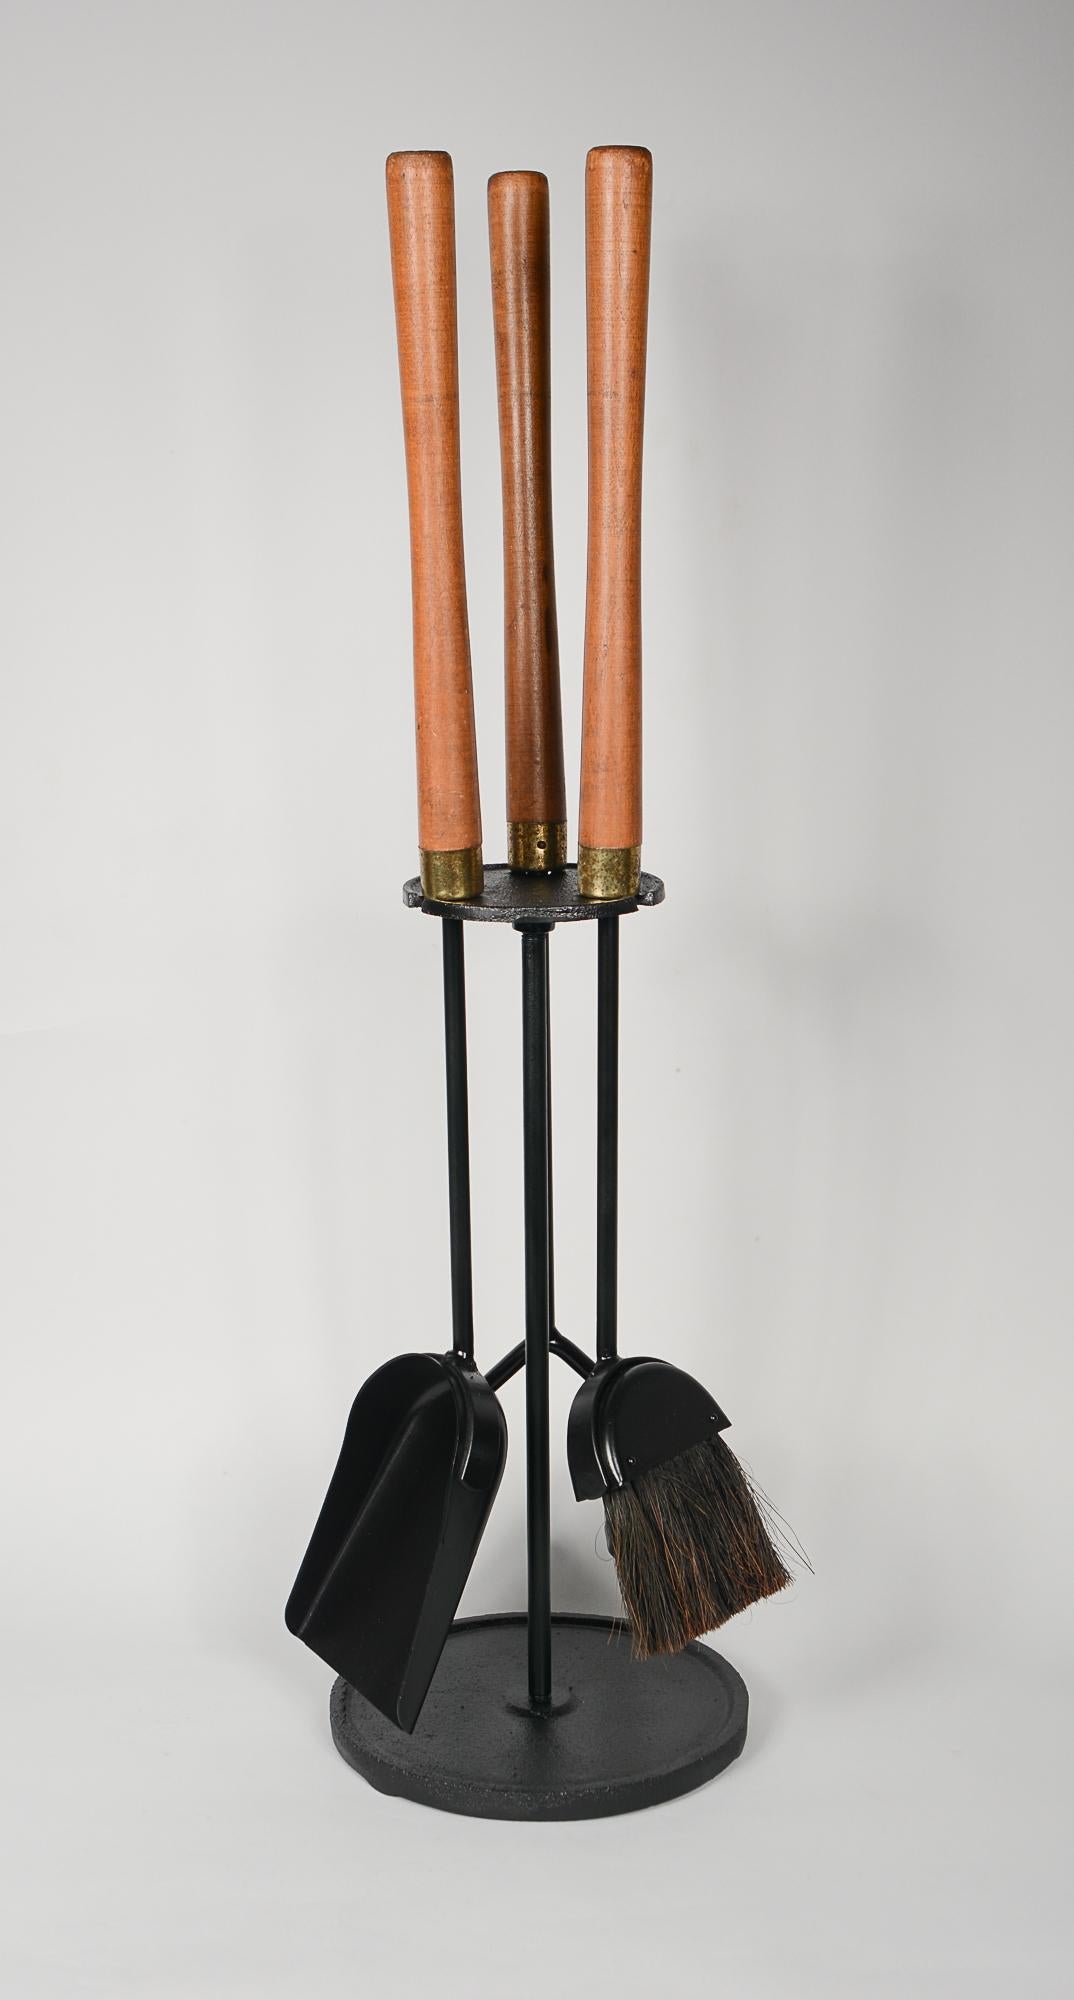 Set of walnut handle fireplace tools by Seymour Mfg. The set includes a poker, broom and shovel. These are well made sturdy tools. The iron appears to be recently painted. The handles have the original finish with minor wear. The brass plated